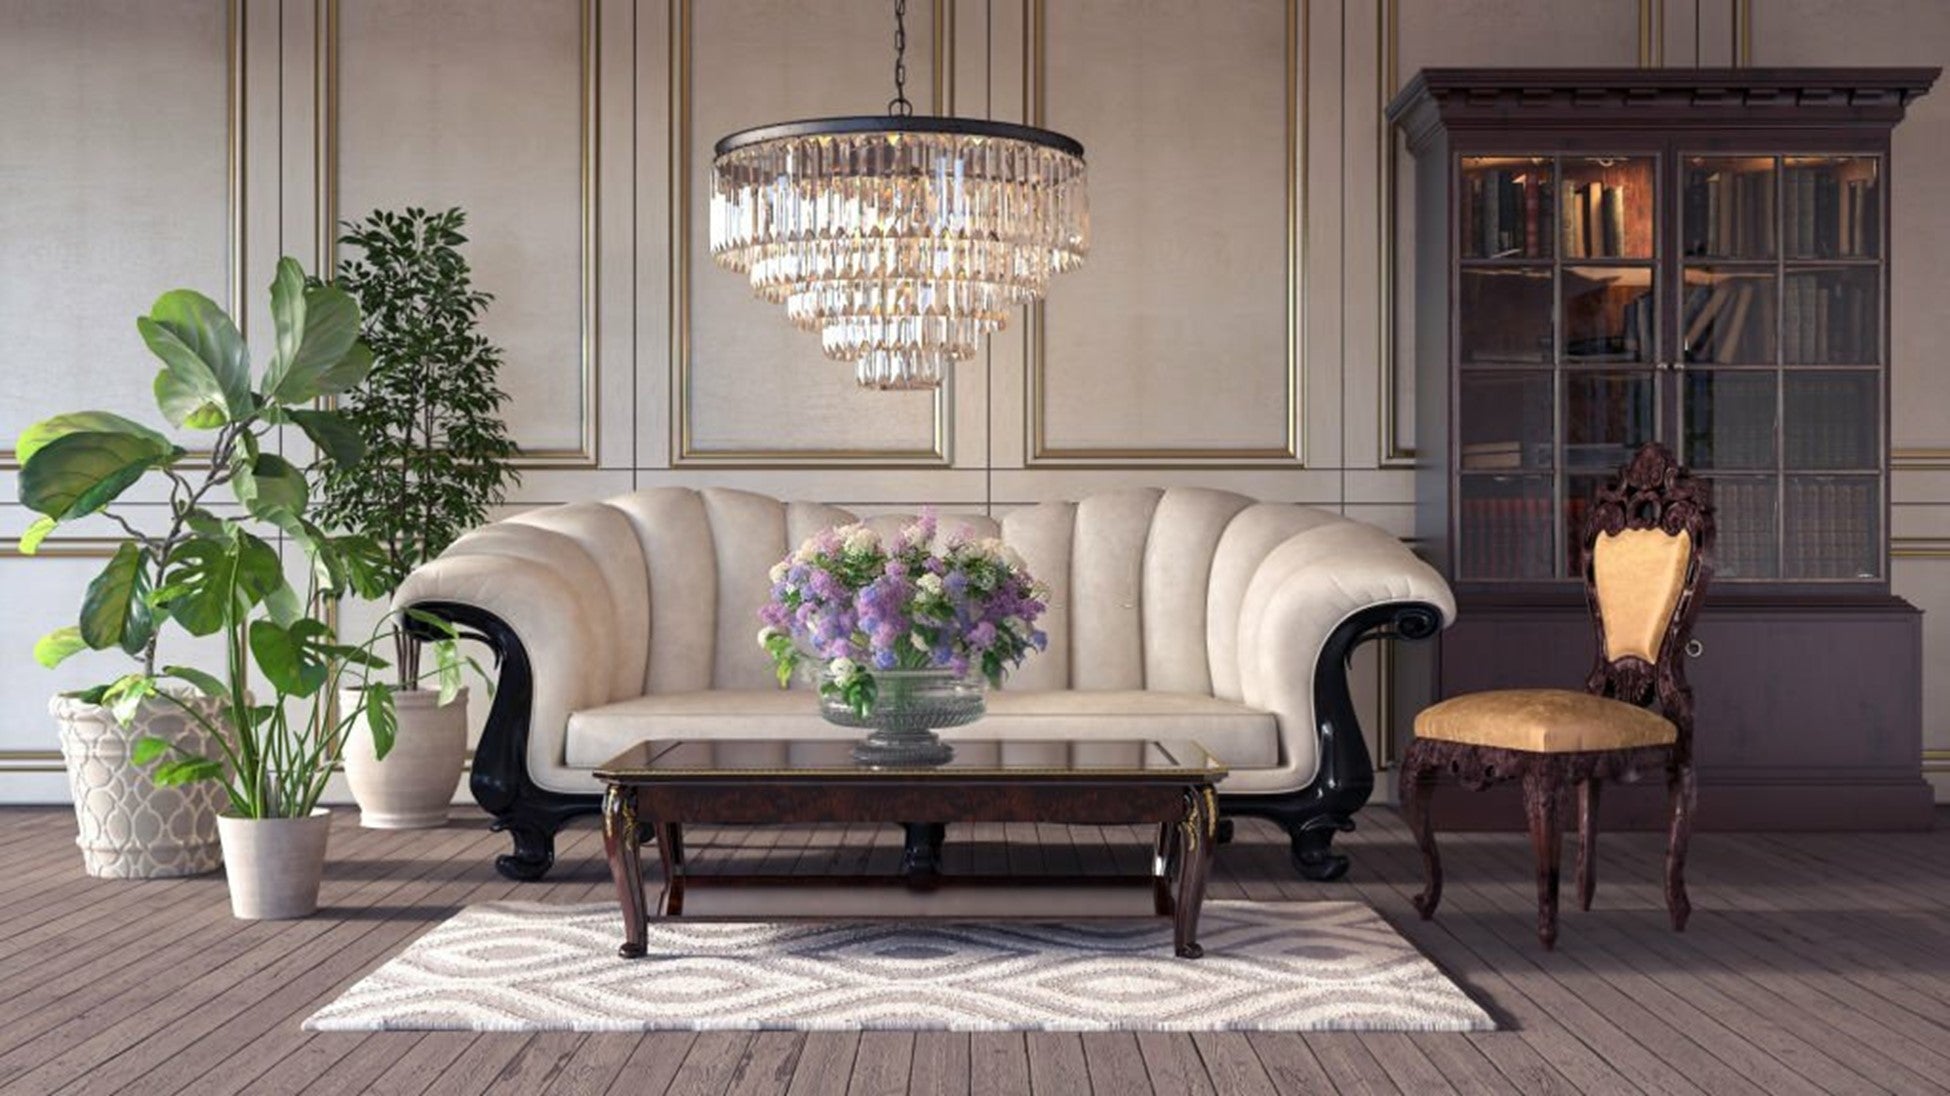 Chandelier Lighting Tips: Illuminate Your Space with Elegance